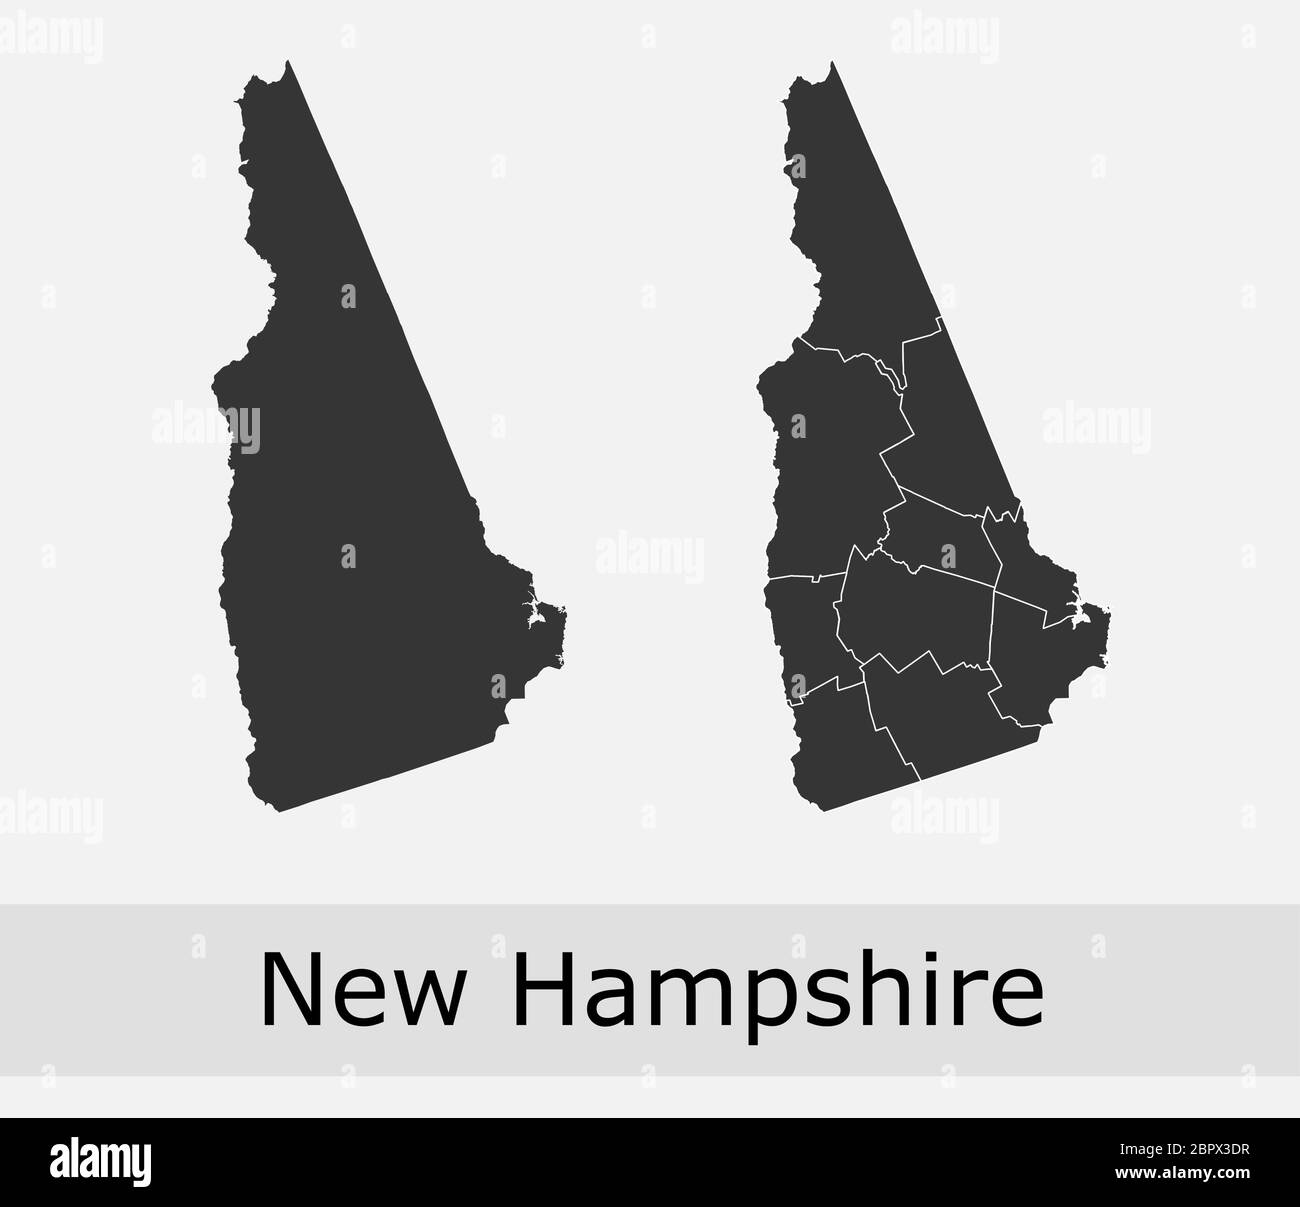 New Hampshire maps vector outline counties, townships, regions, municipalities, departments, borders Stock Vector